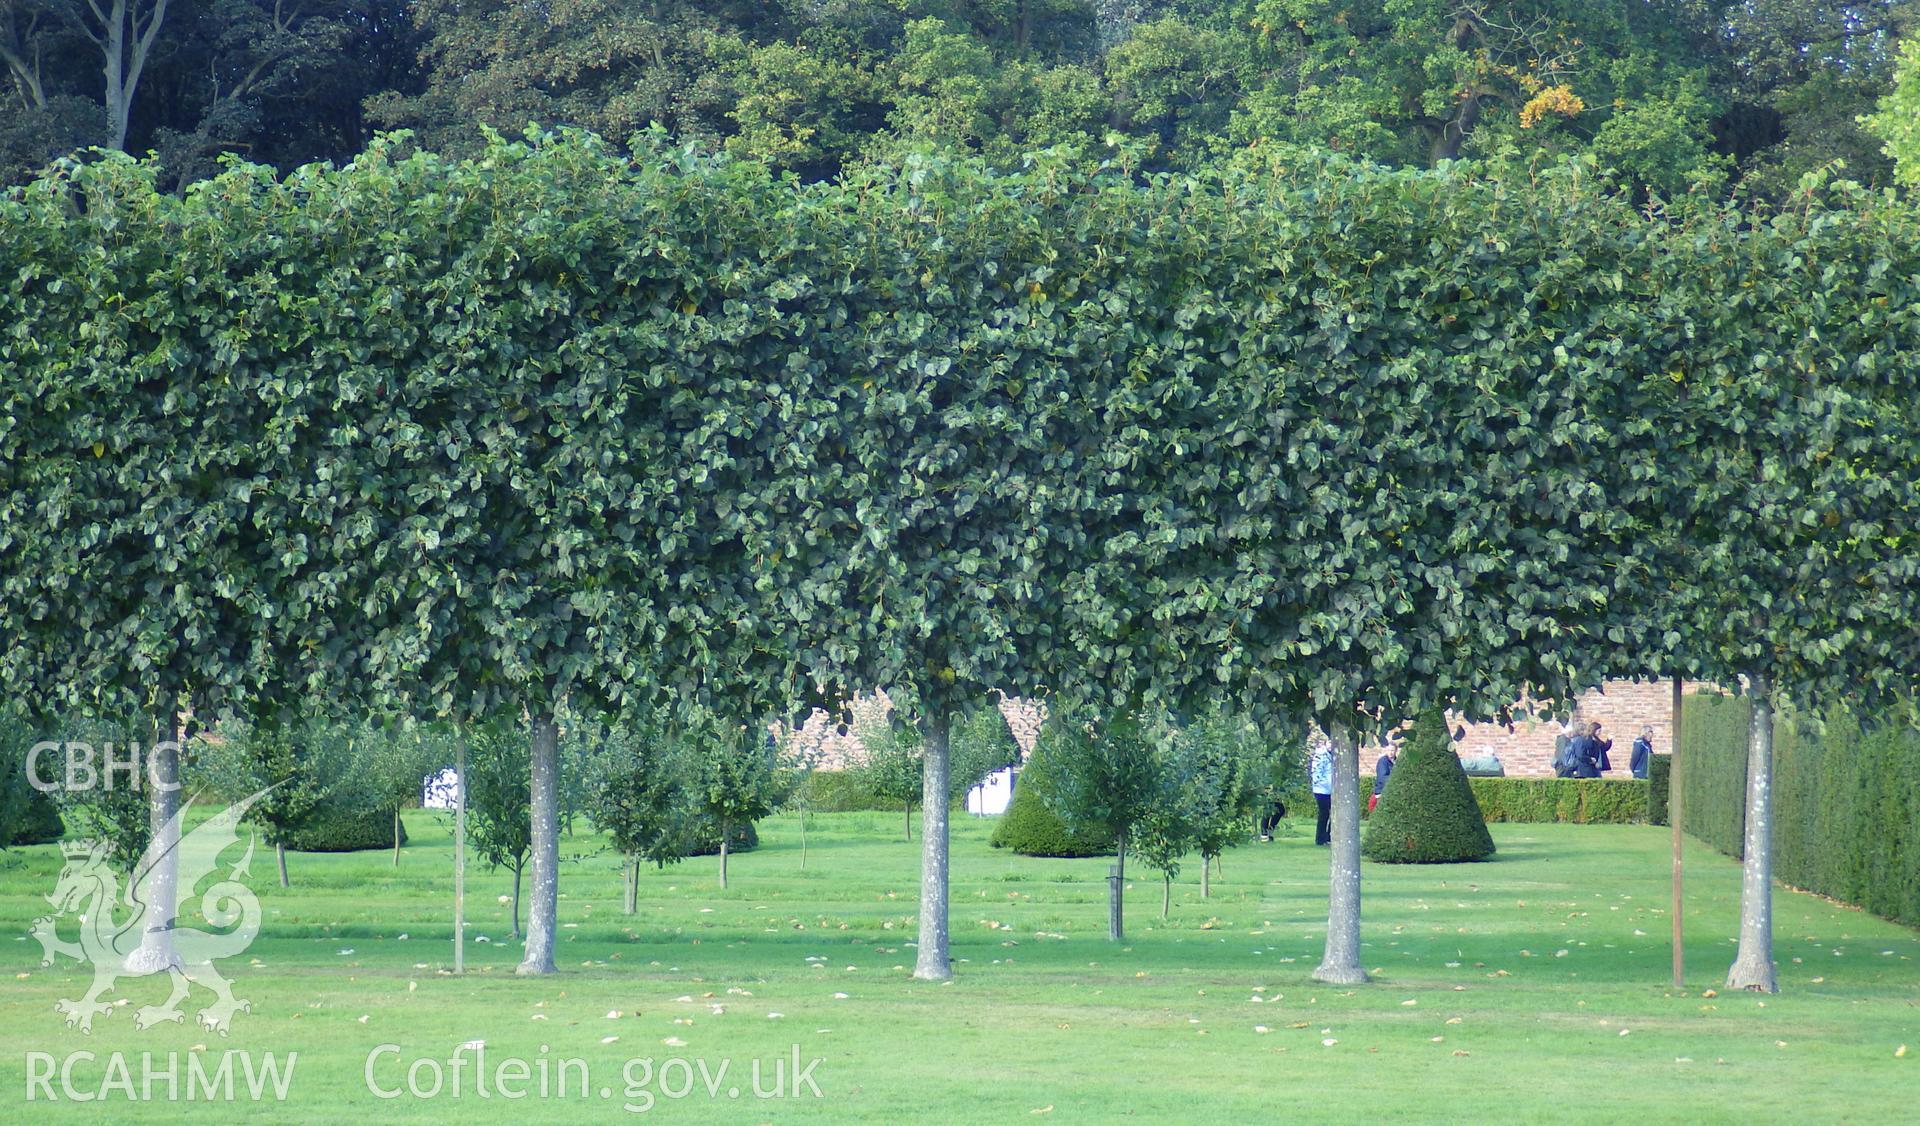 Decorative lime tree plantings lining the southern side of the main east-west axis path